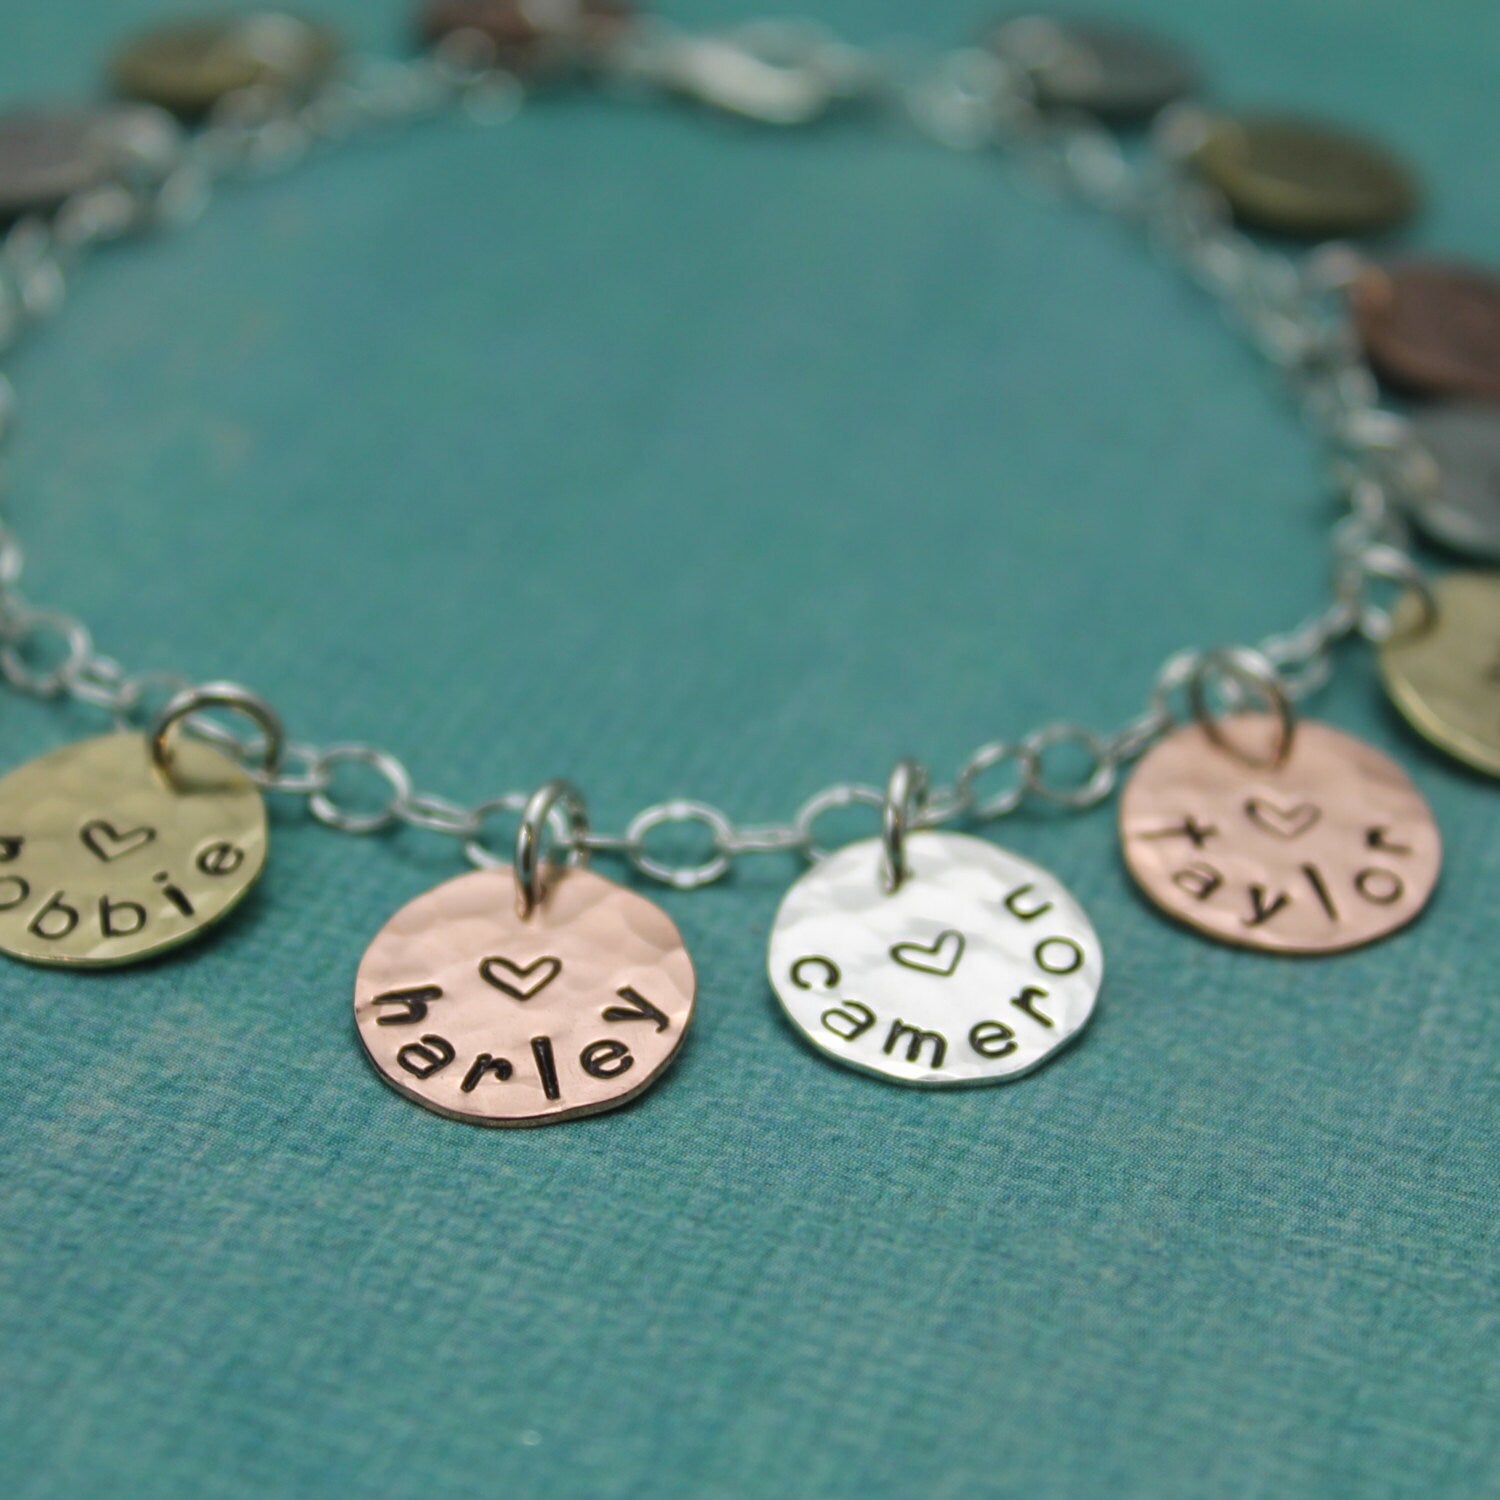 Mother Charm Bracelet, Grandmother Charm Bracelet, Personalized Mom Charm Bracelet, Grandma Charm Bracelet, Hand Stamped Jewelry